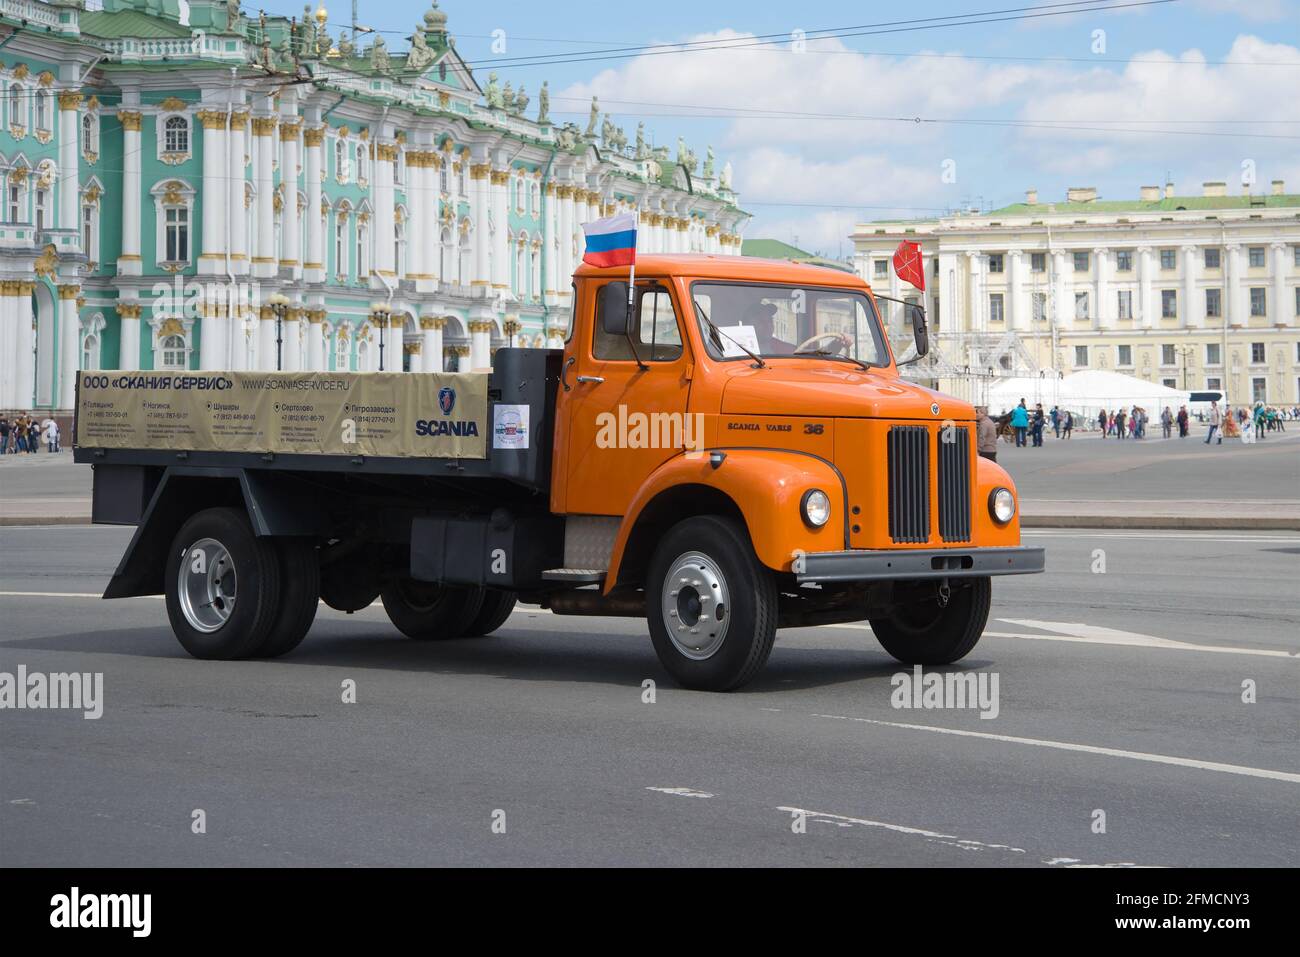 SAINT-PETERSBURG, RUSSIA - MAY 21, 2017: One of the last trucks of the firm 'Scania-Wabis' on the annual retro transport parade Stock Photo